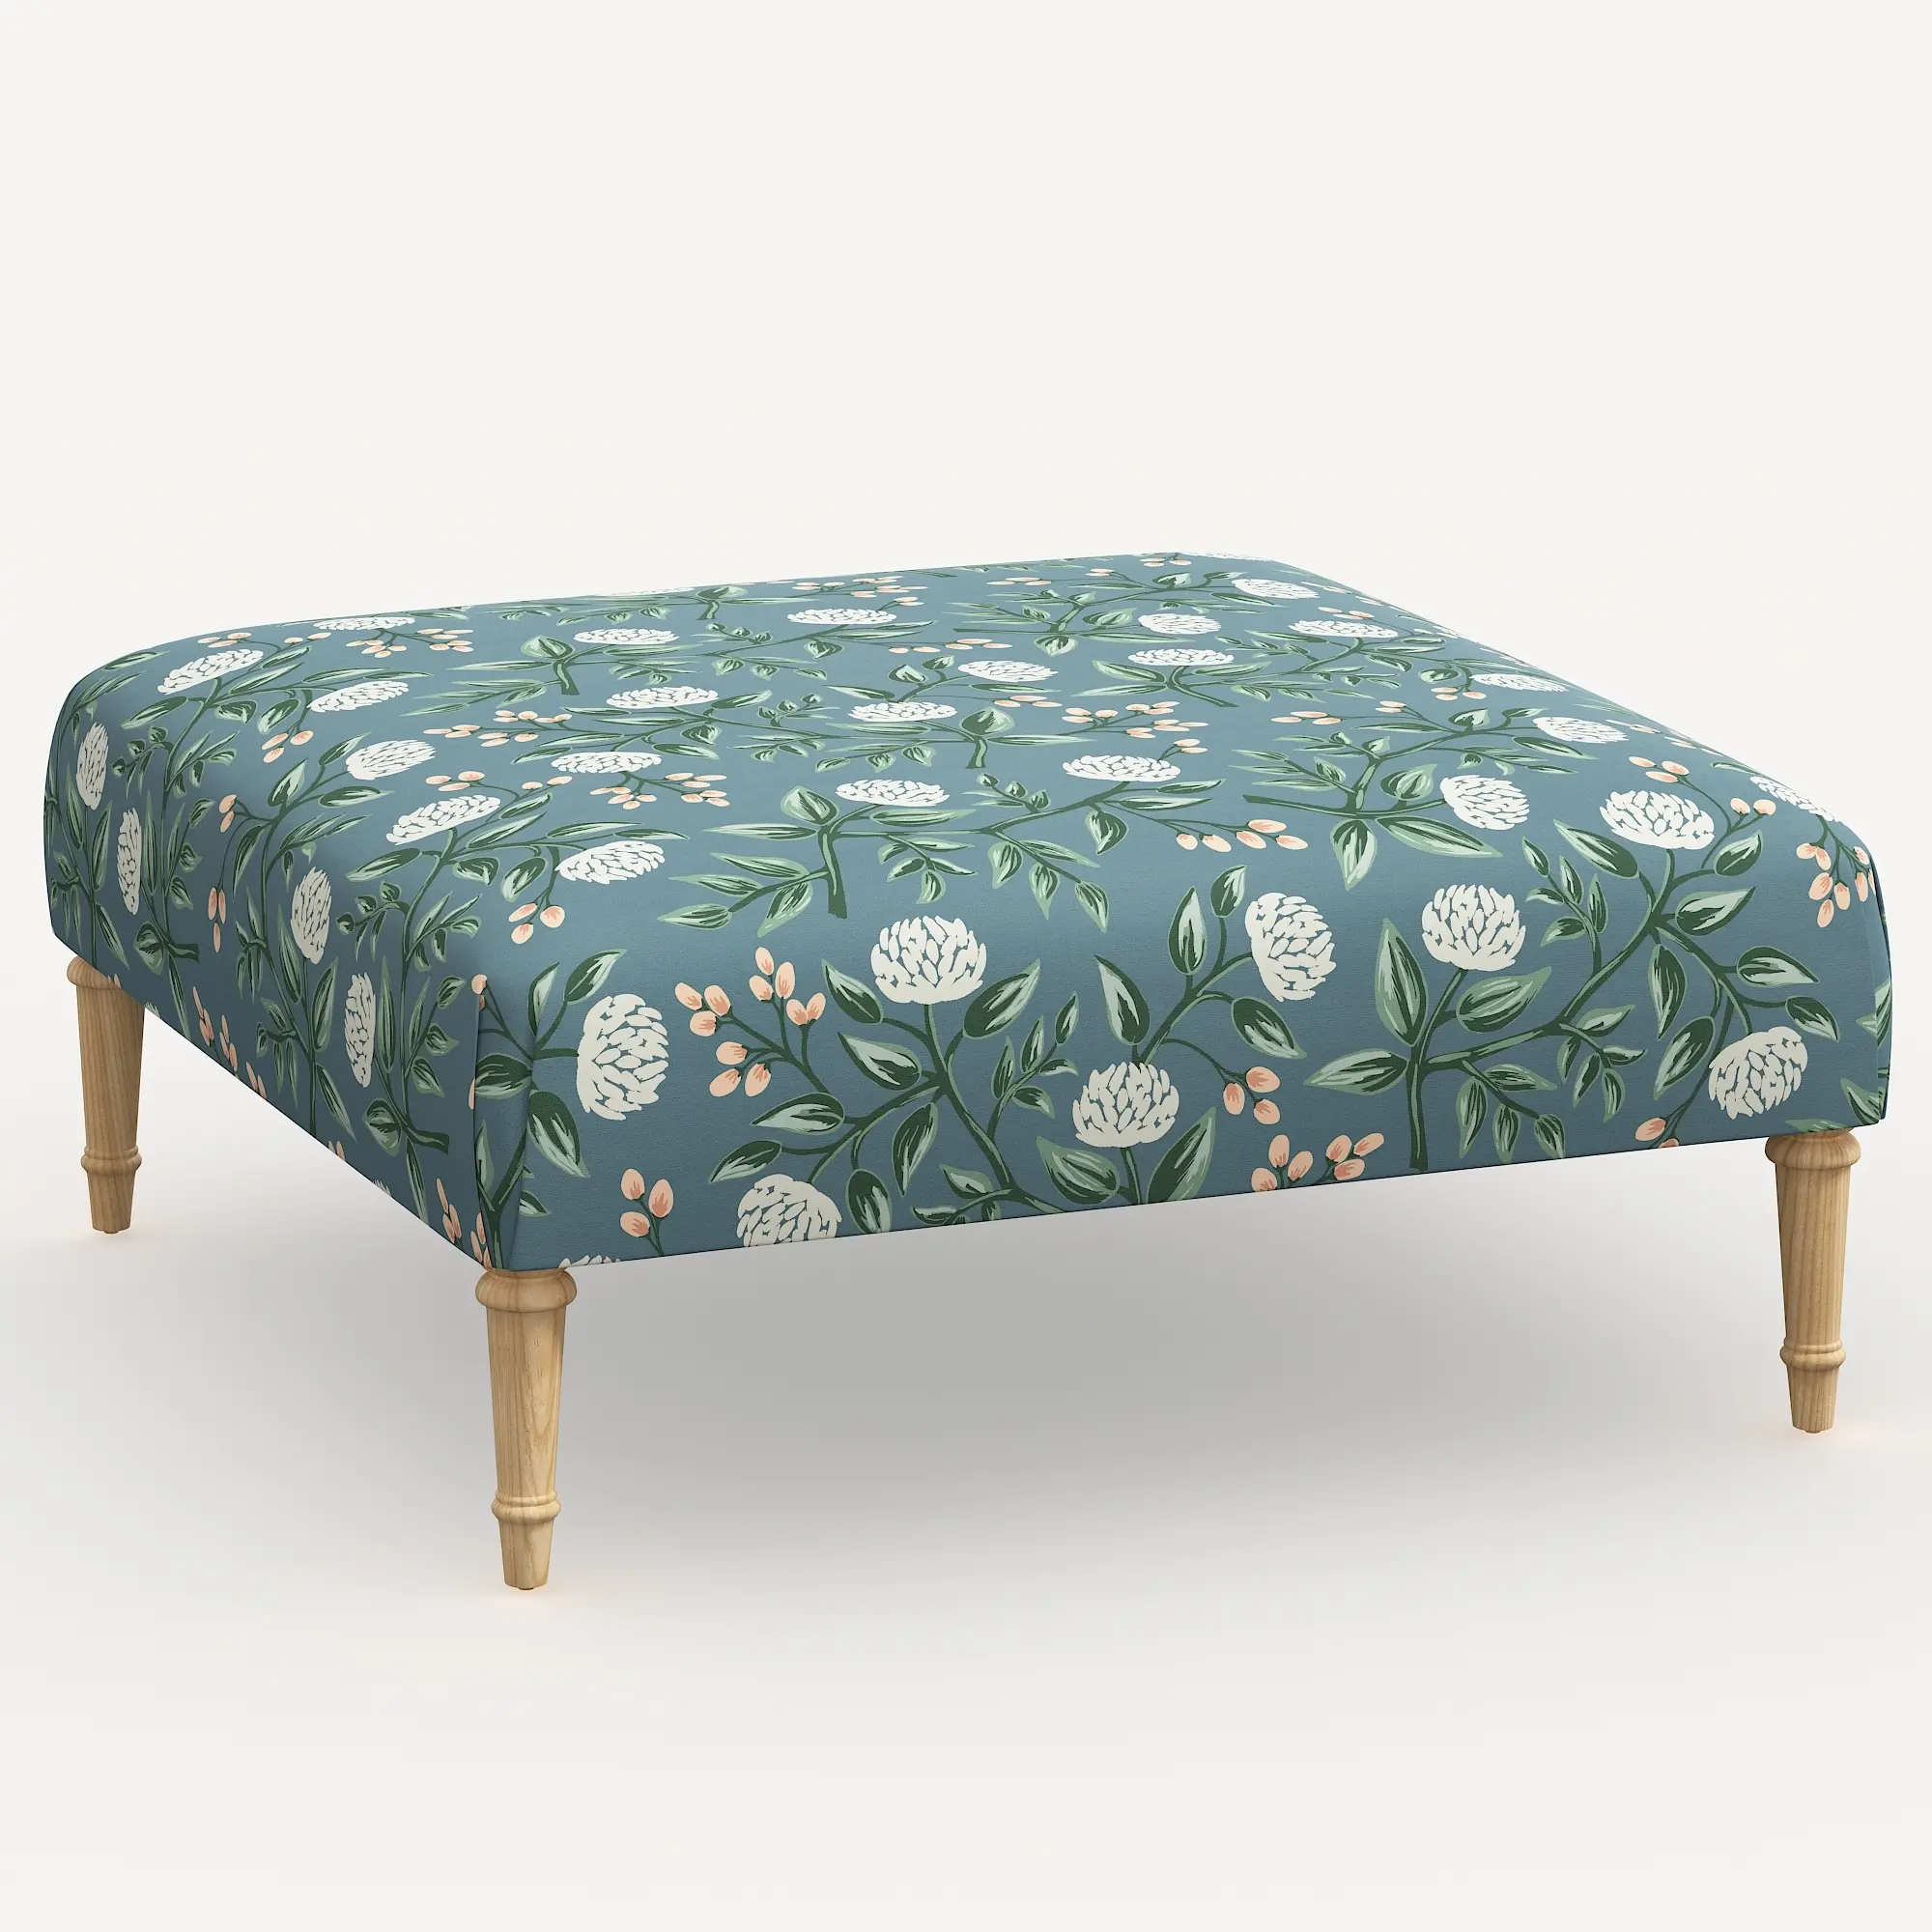 Rifle Paper Co. Greenwich Emeral Peonies Ottoman with Natural Legs